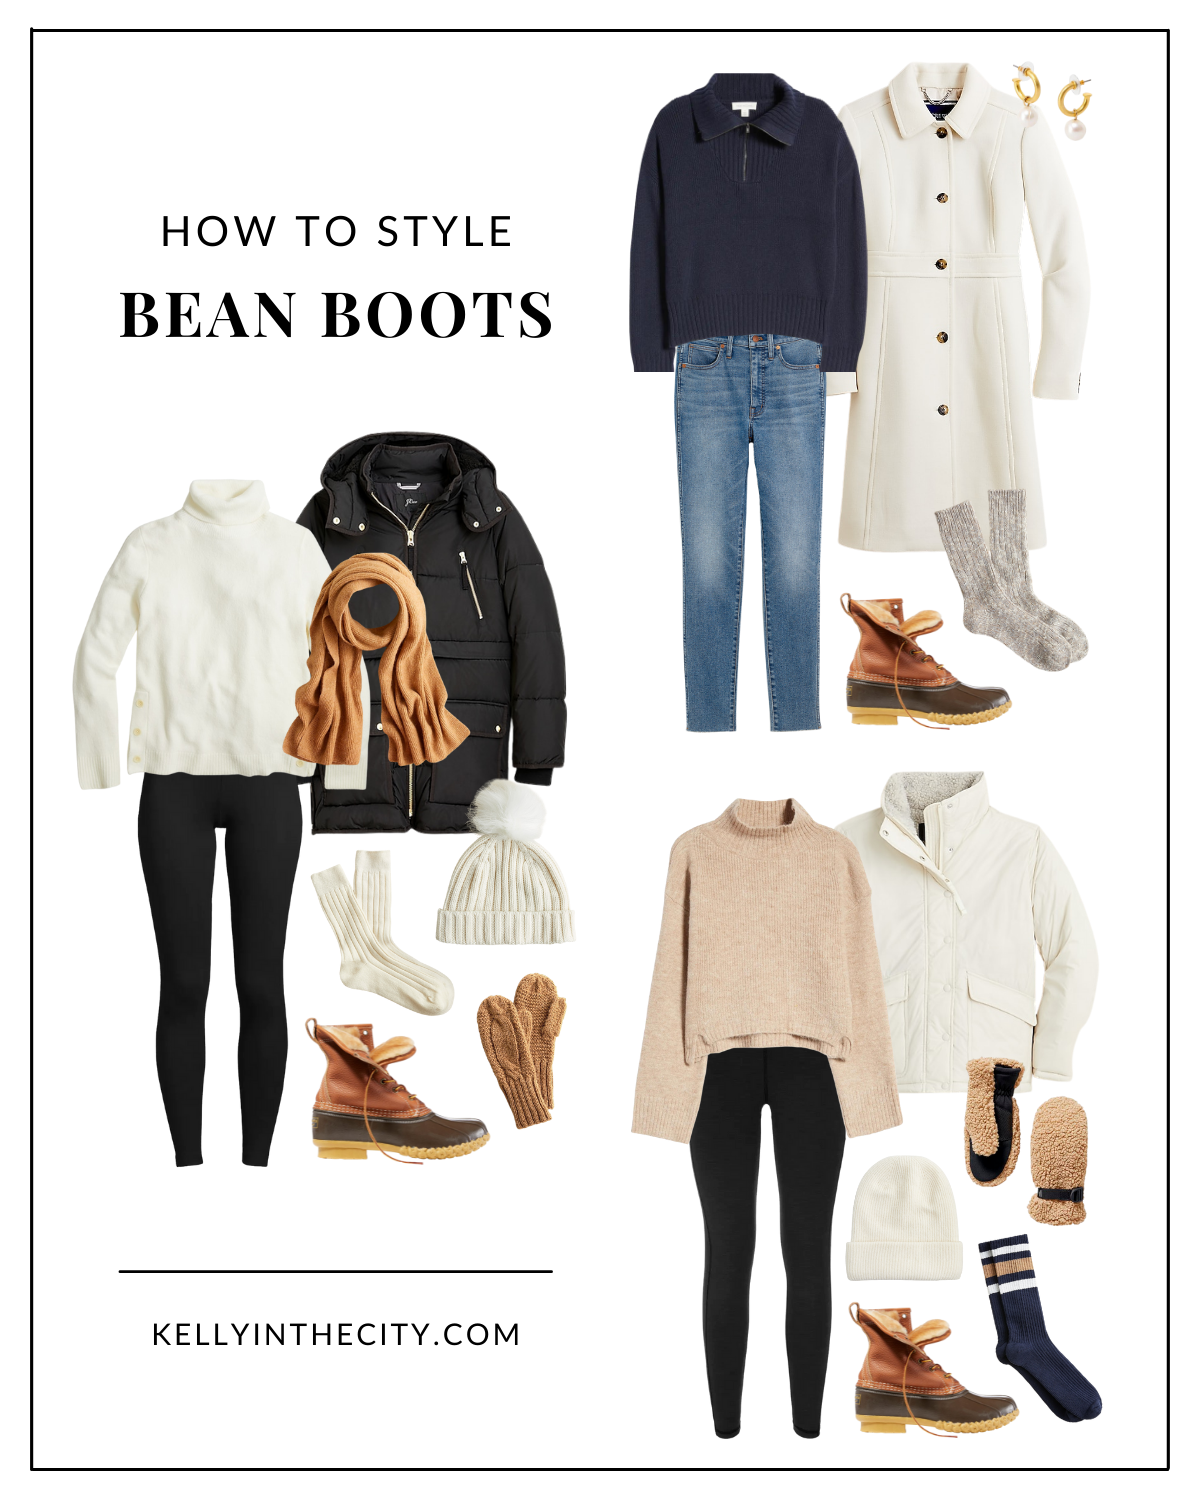 How to Style Bean Boots